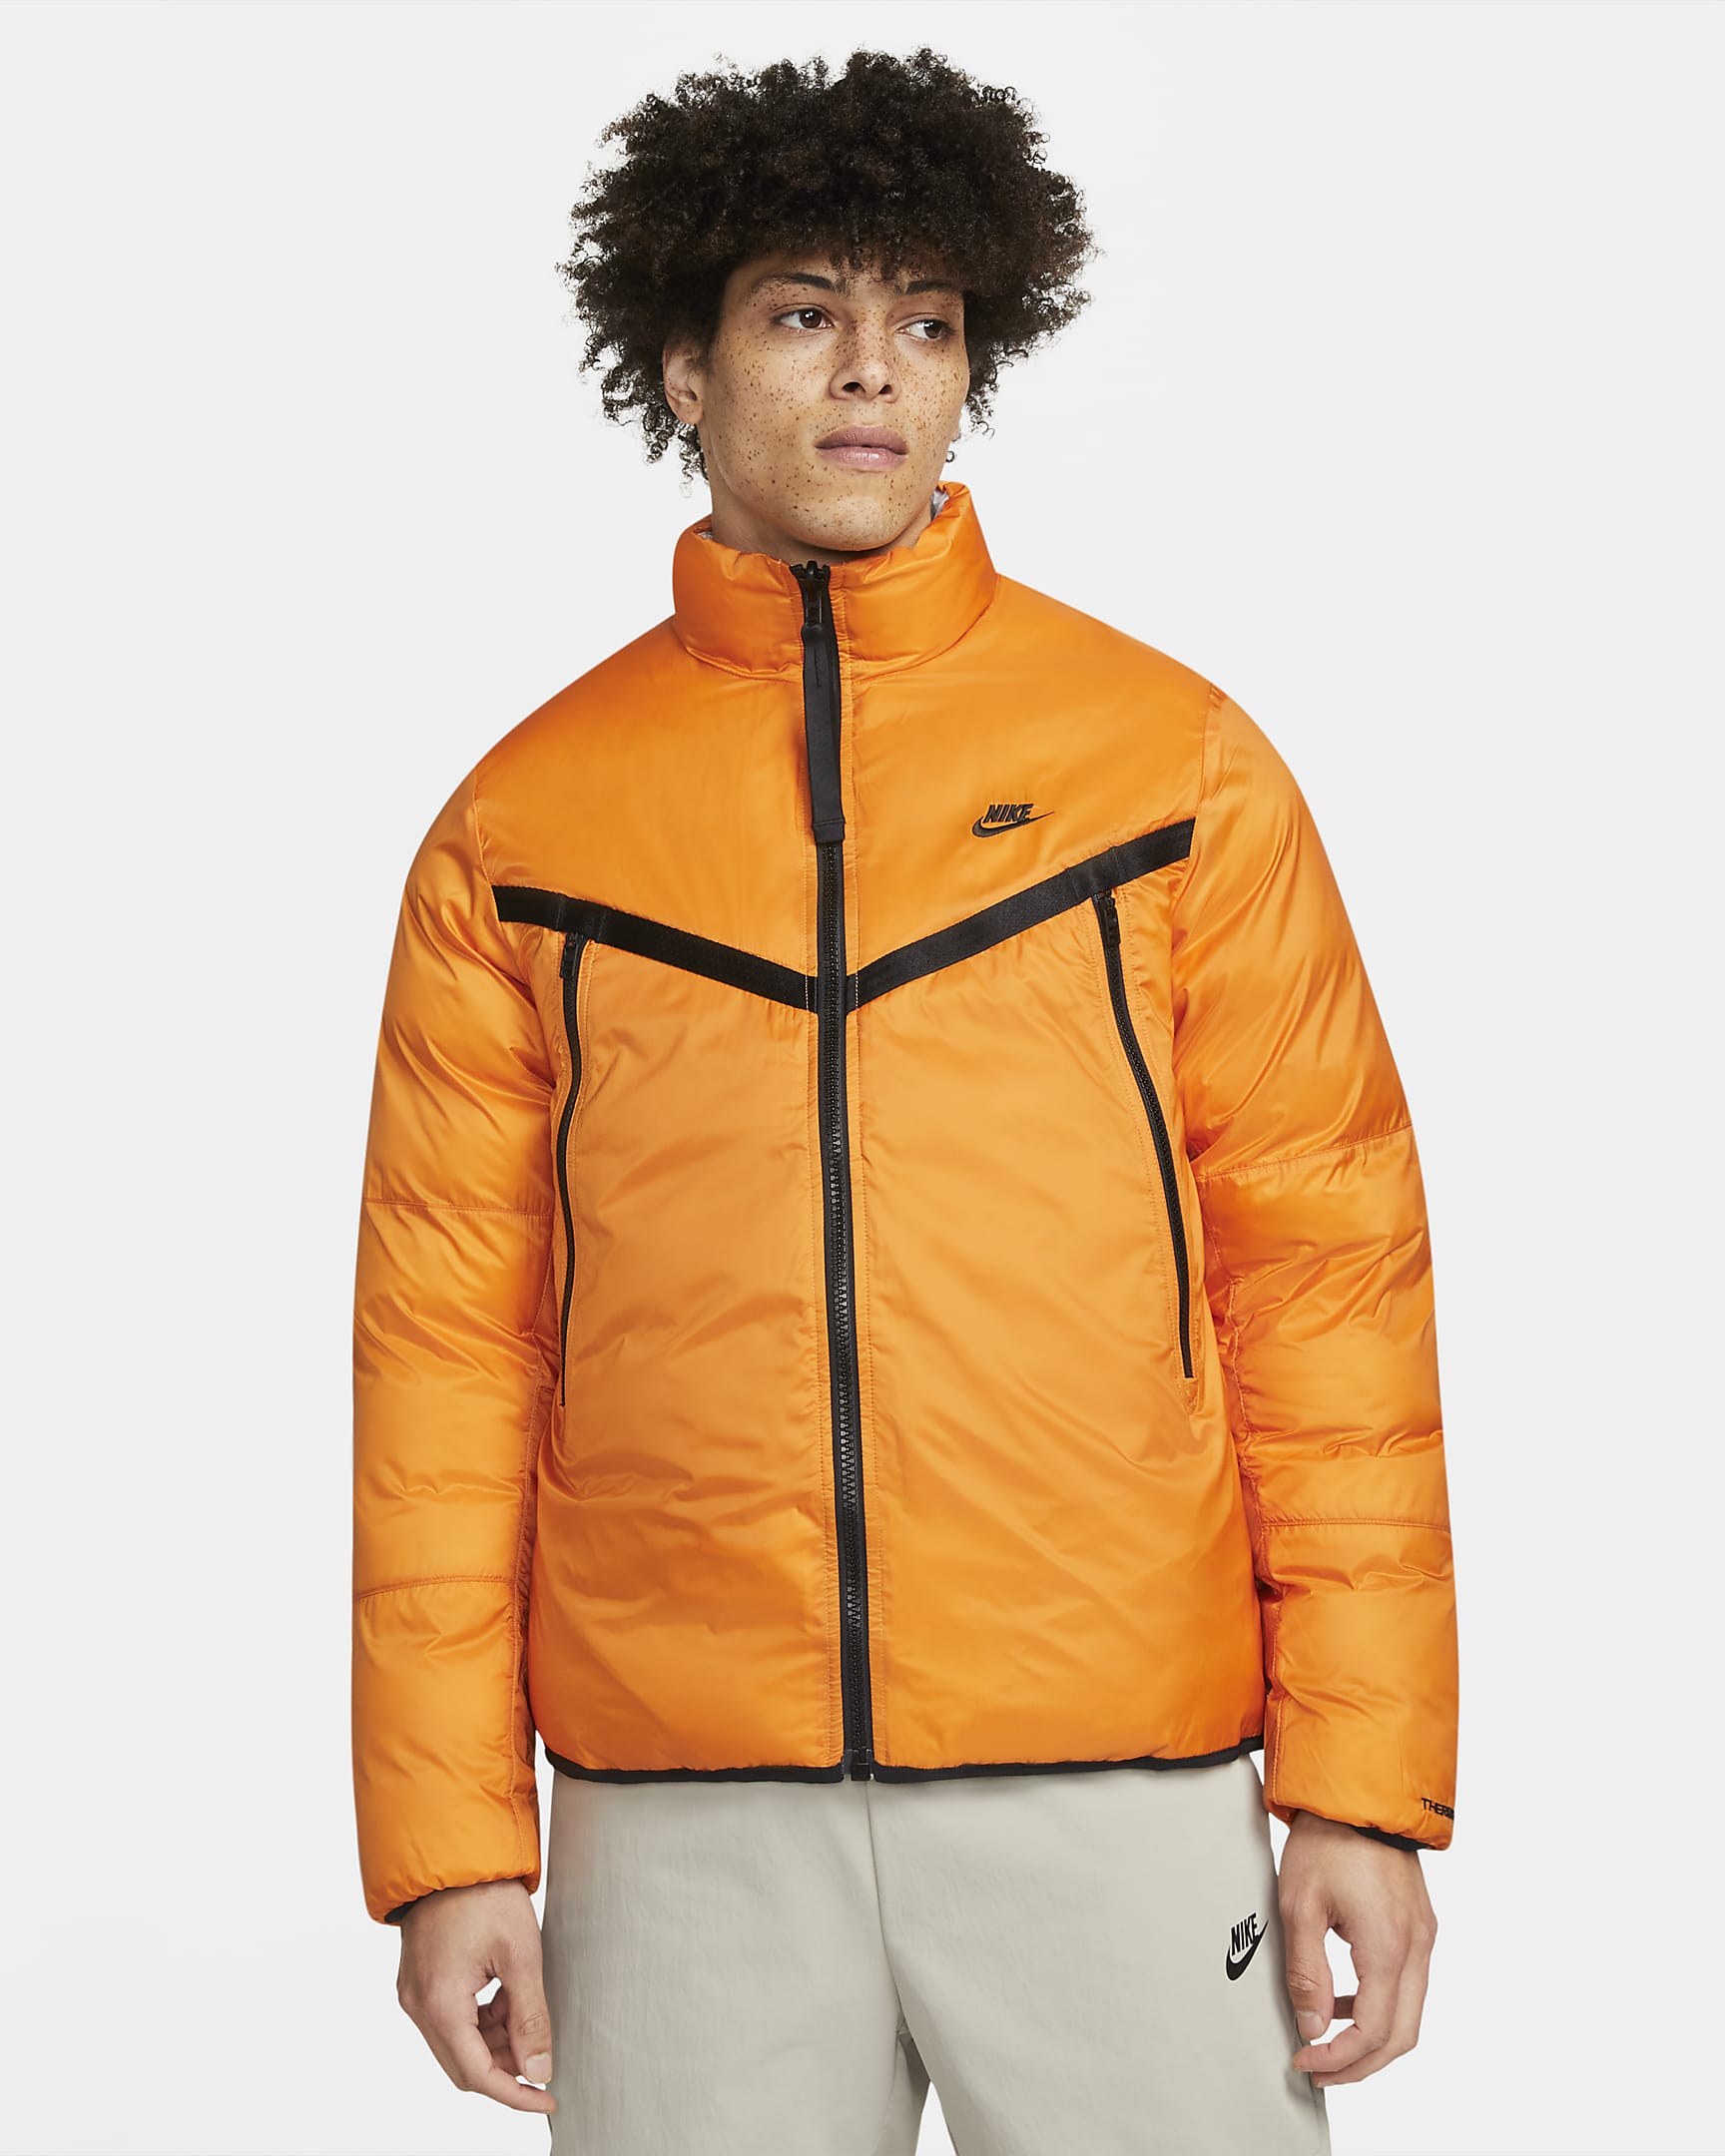 nike-sportswear-therma-fit-repel-mens-reversible-jacket-LbrrSX.png